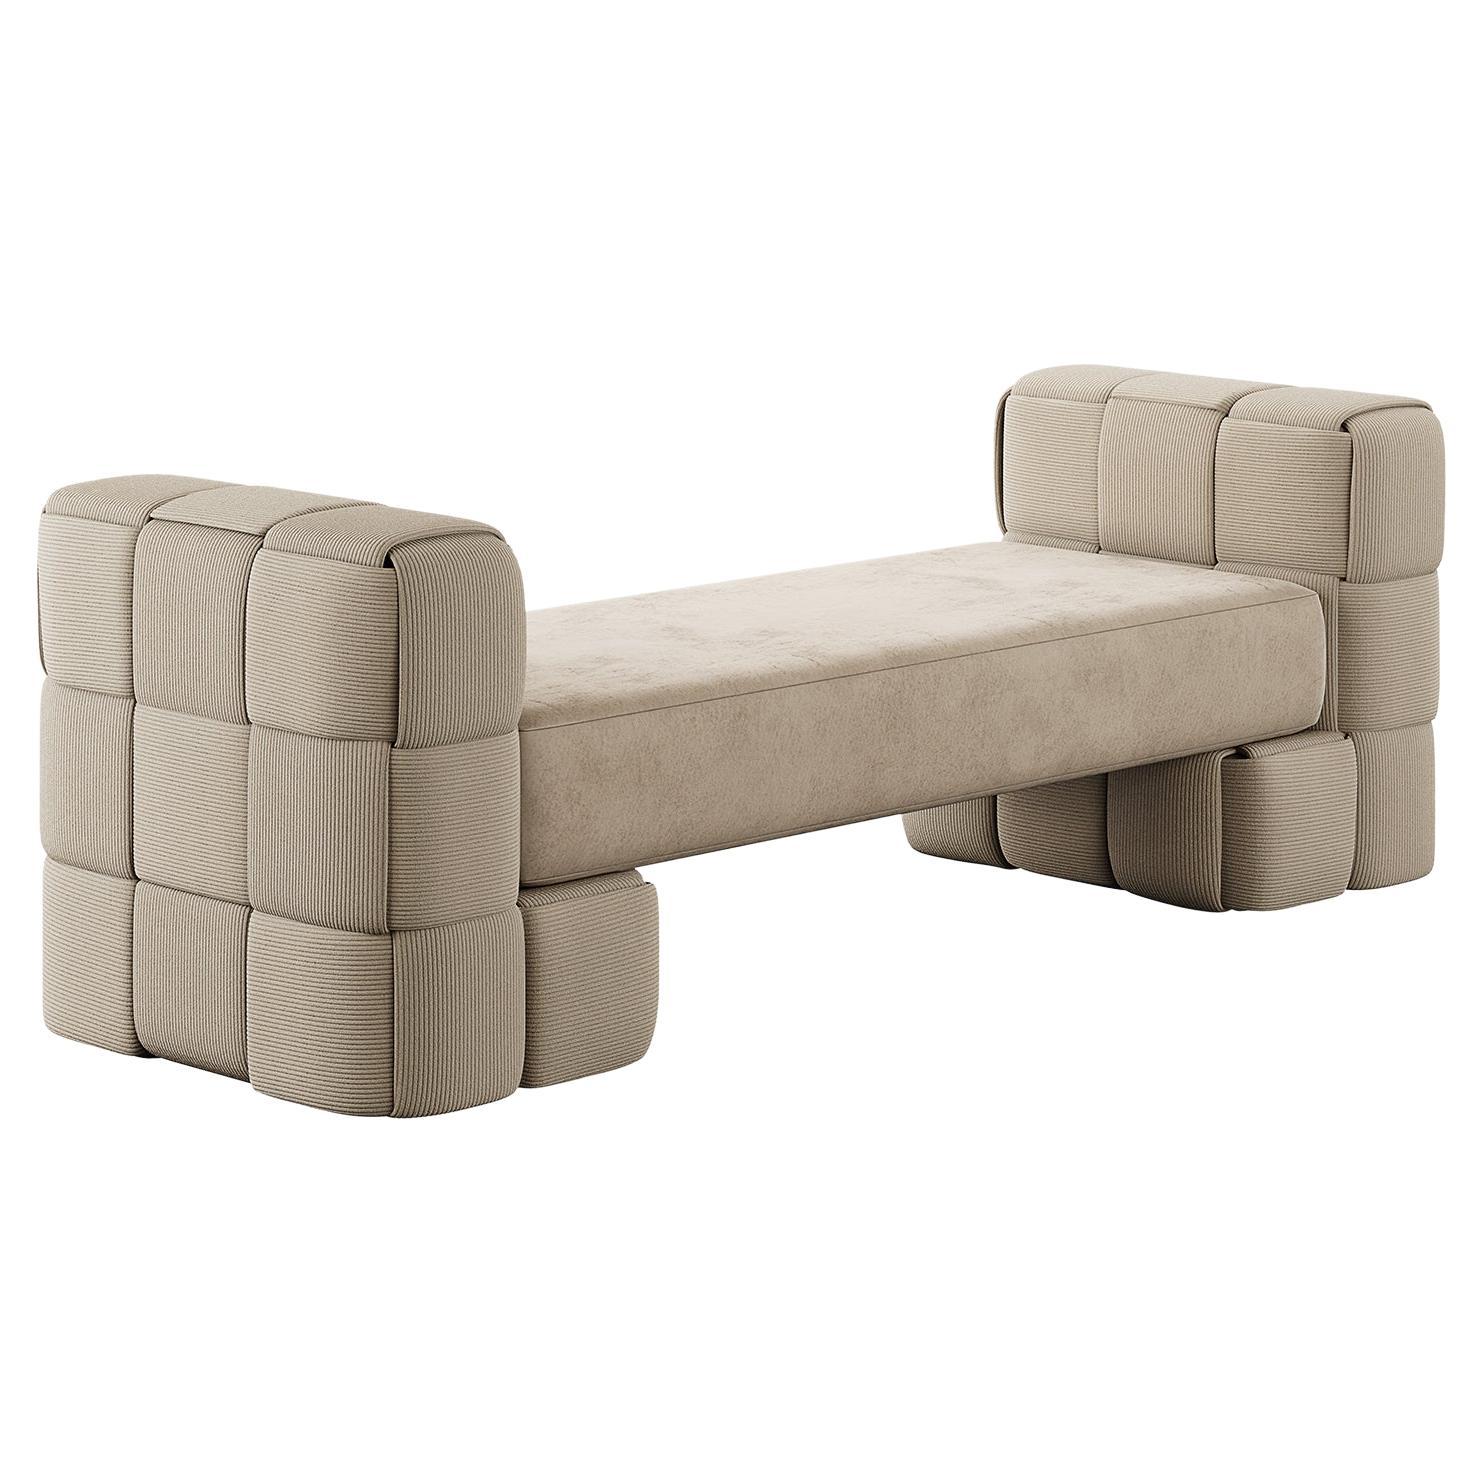 Contemporary Woven Upholstered Bench with Arms Hellbraun Beige Cord im Angebot